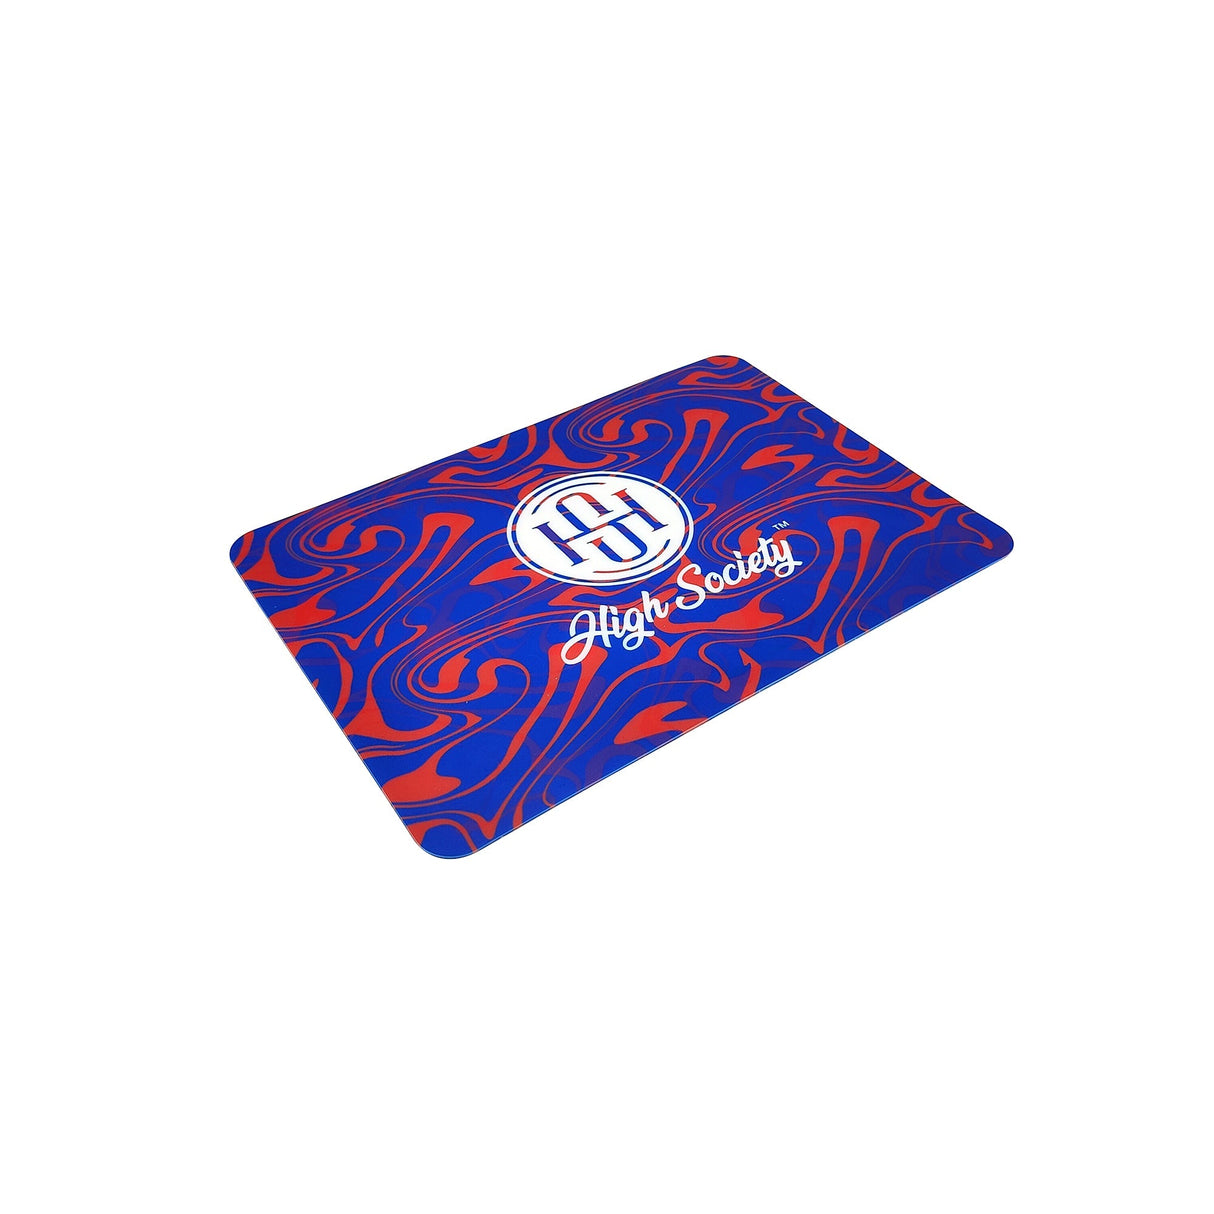 High Society Rectangle Dab Mat in Blurberry with vibrant blue and red swirl design, top view